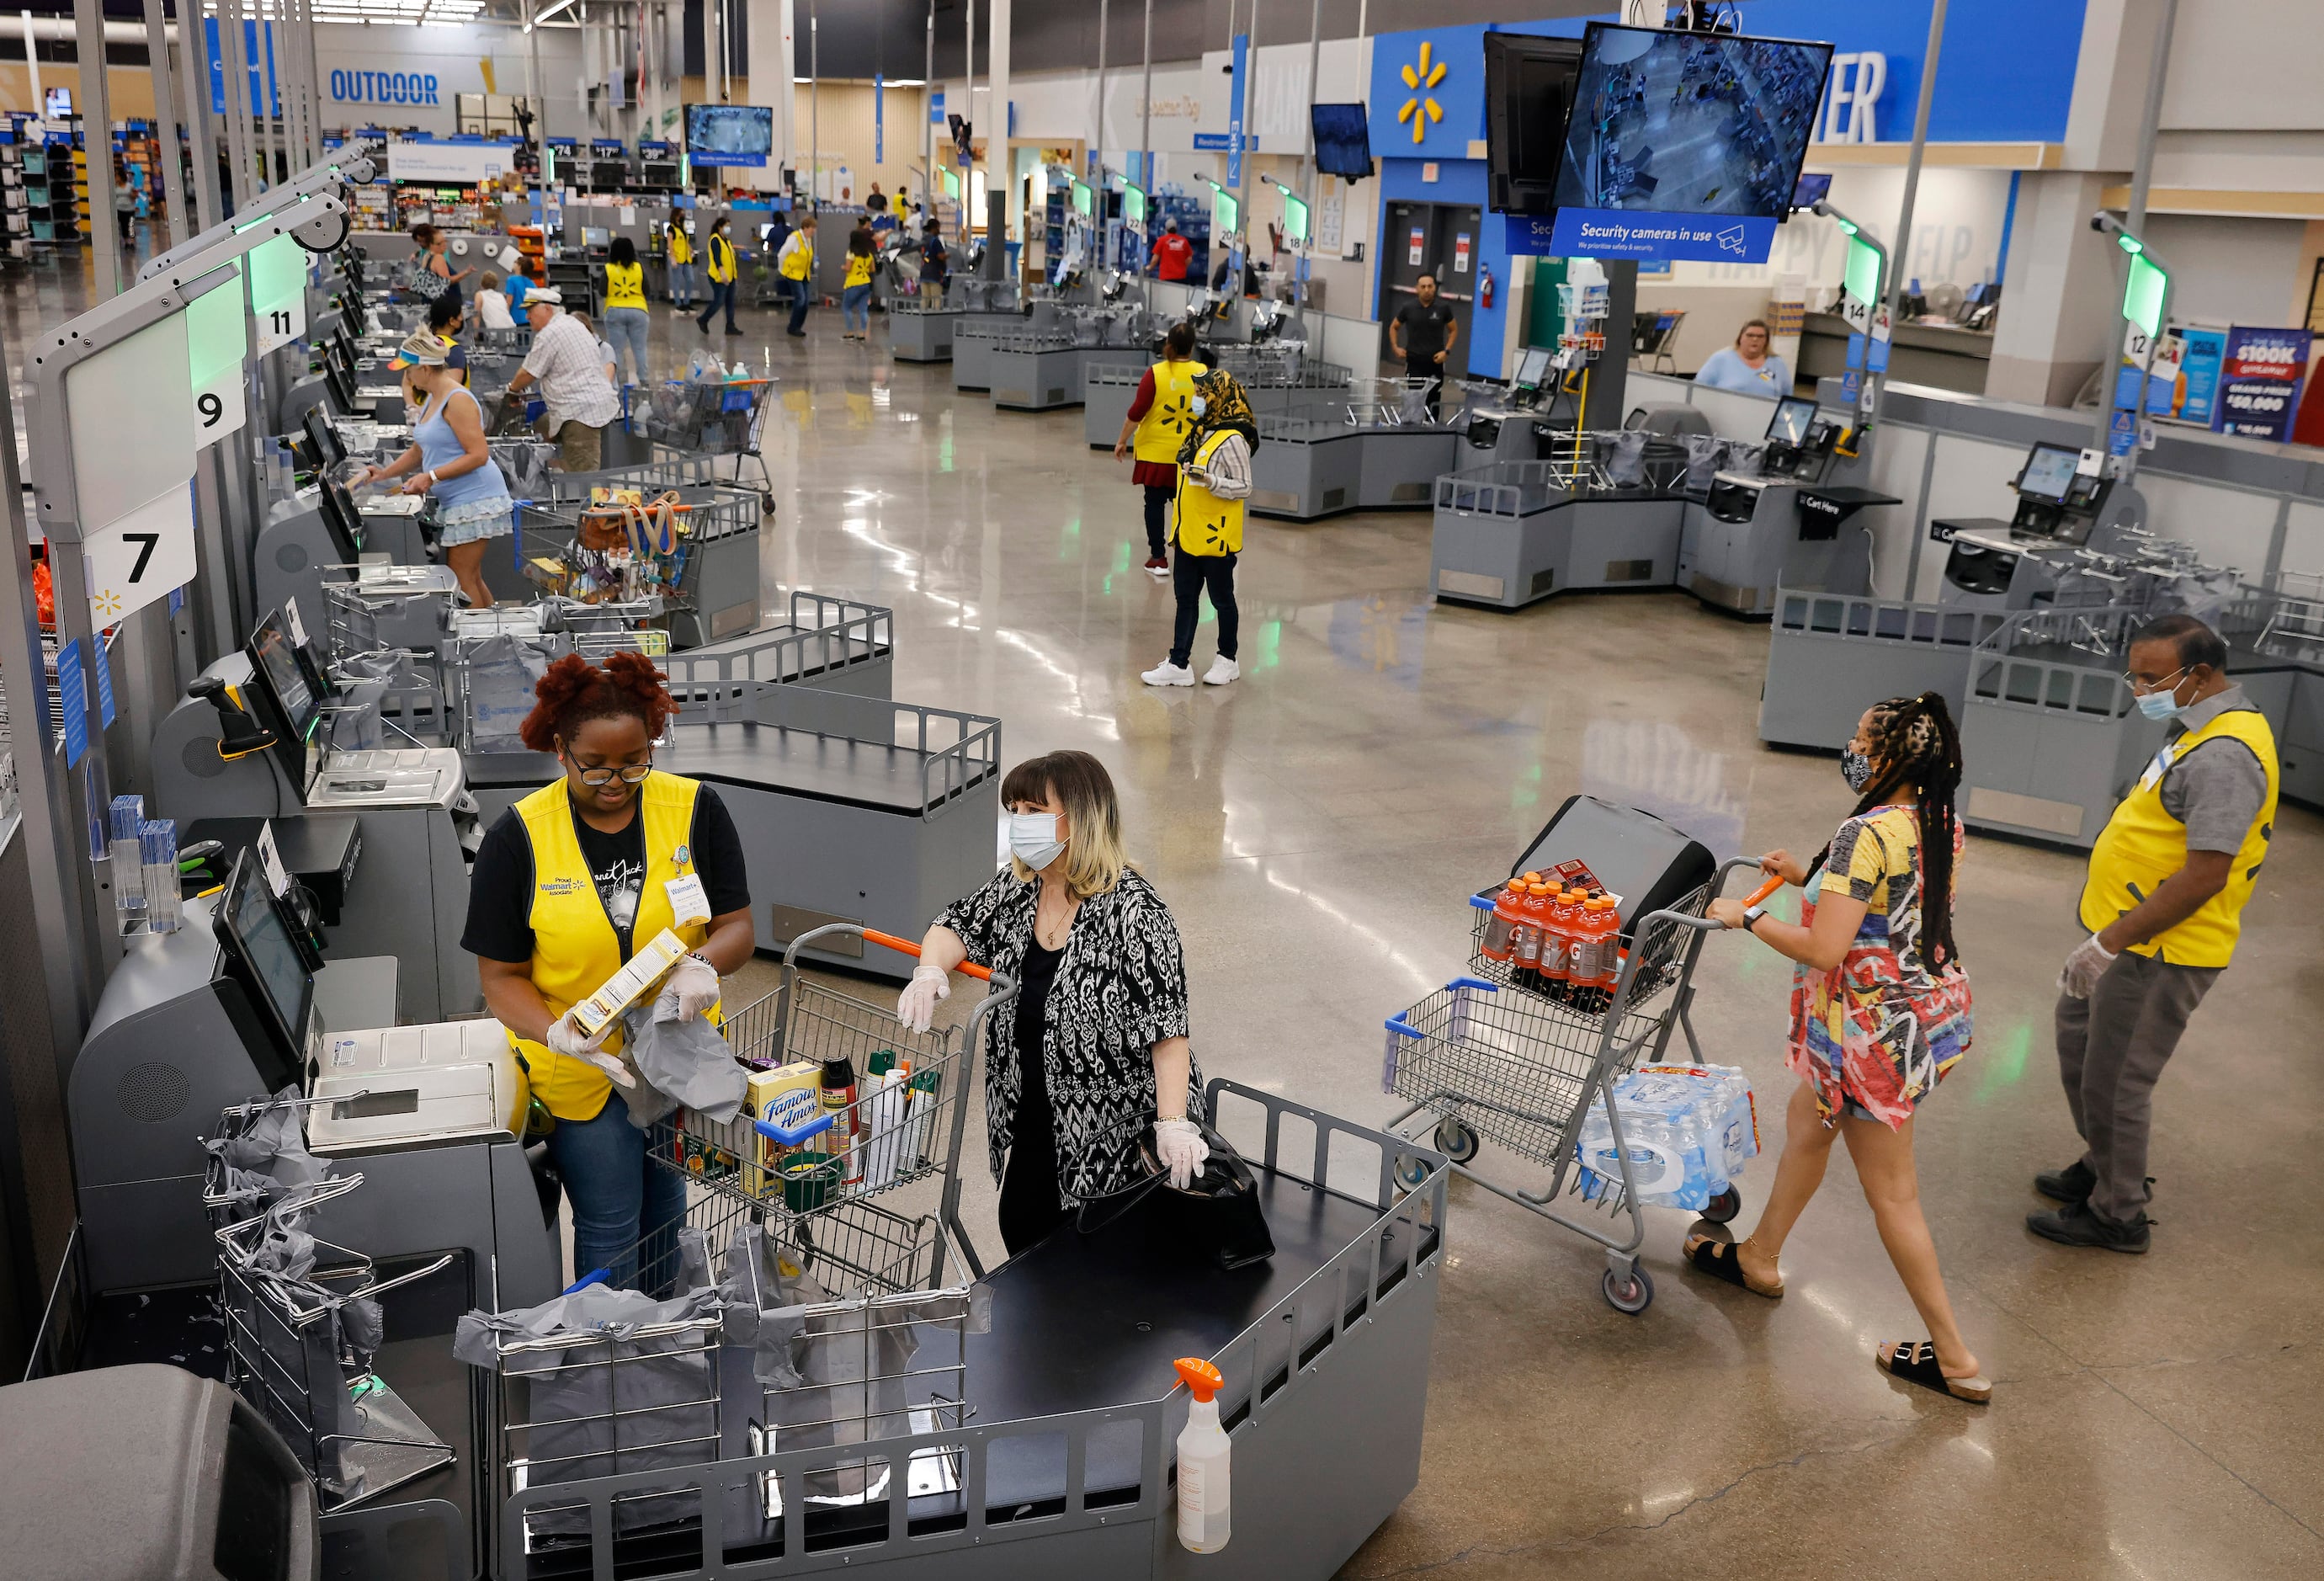 Walmart is testing an all-self-checkout Supercenter in Plano